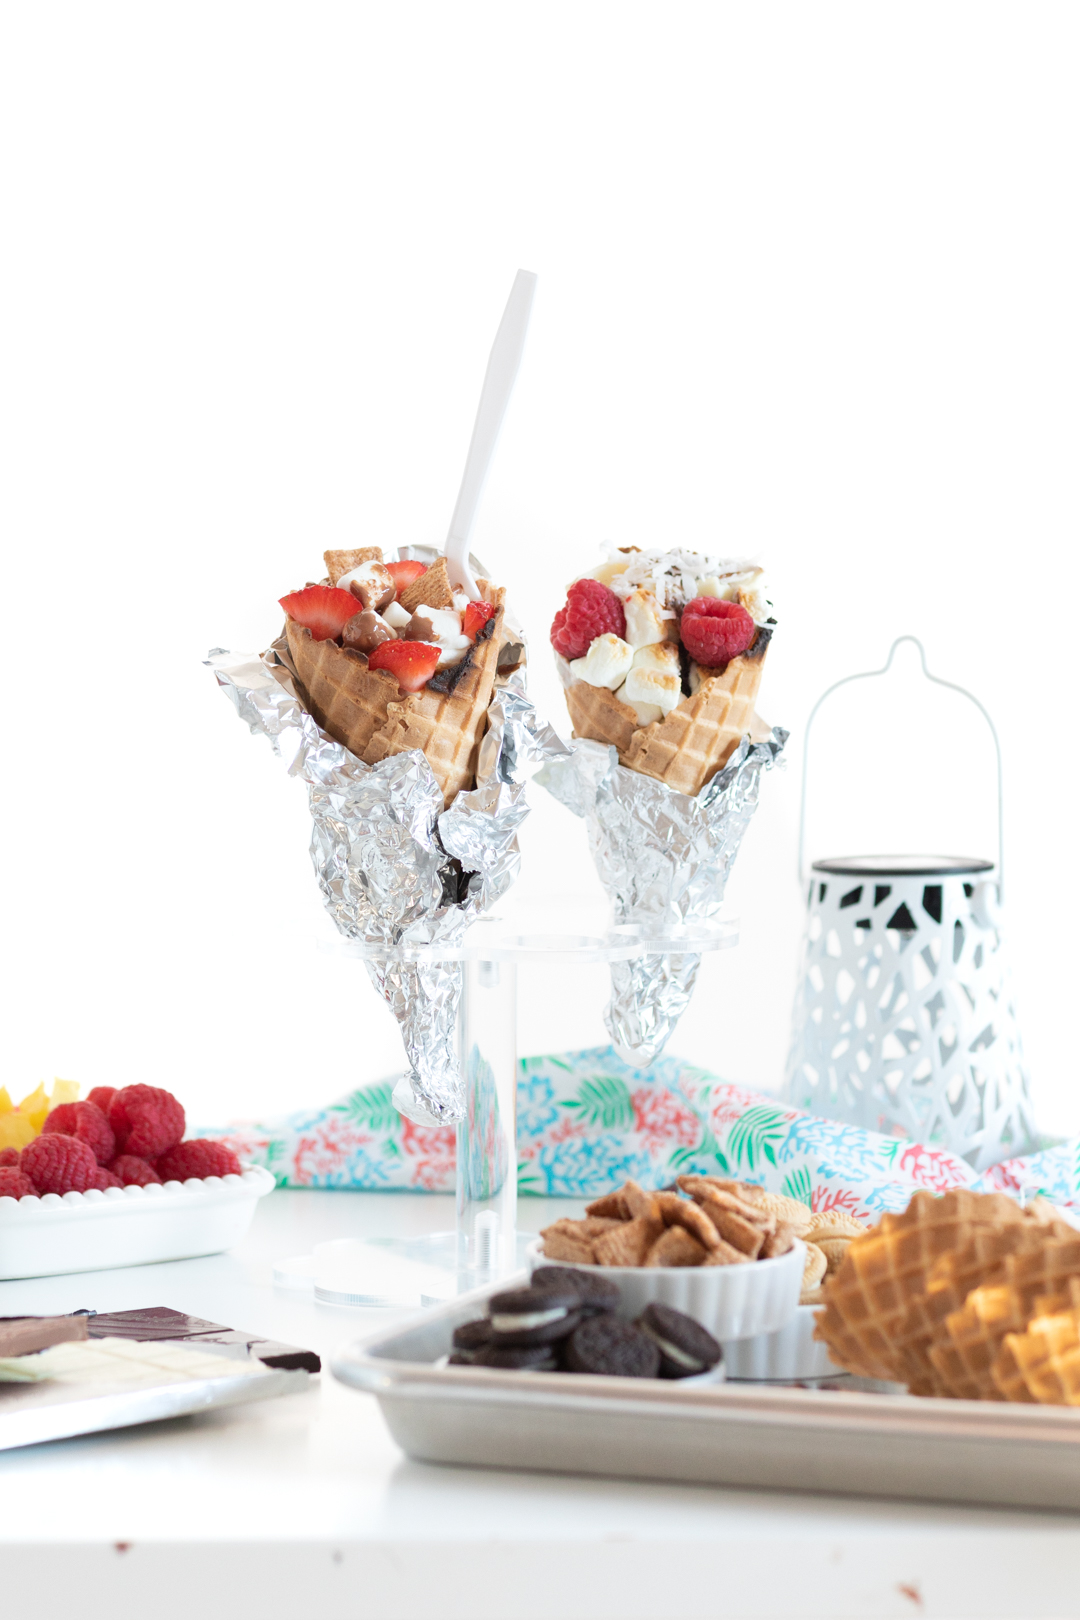 campfire cones resting on an ice cream cone stand, wrapped in foil.  Filled with chocolates, fruits and mini marshmallows.